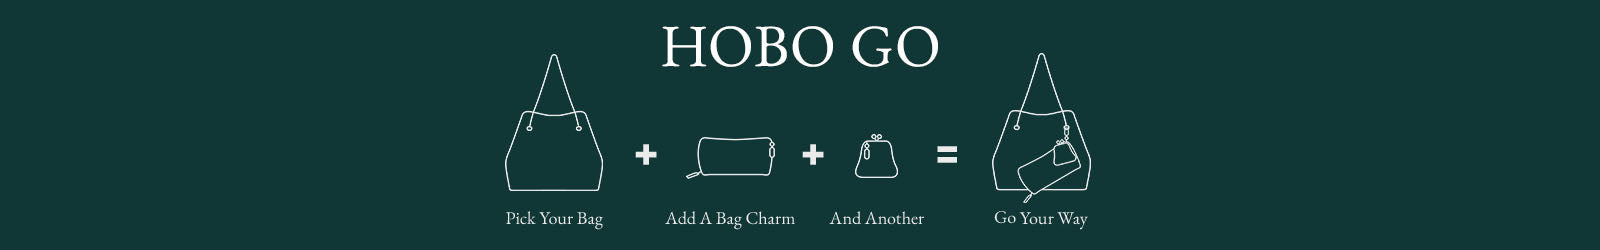 Meet the new accessory for accessories. Shop the new HOBO GO collection.